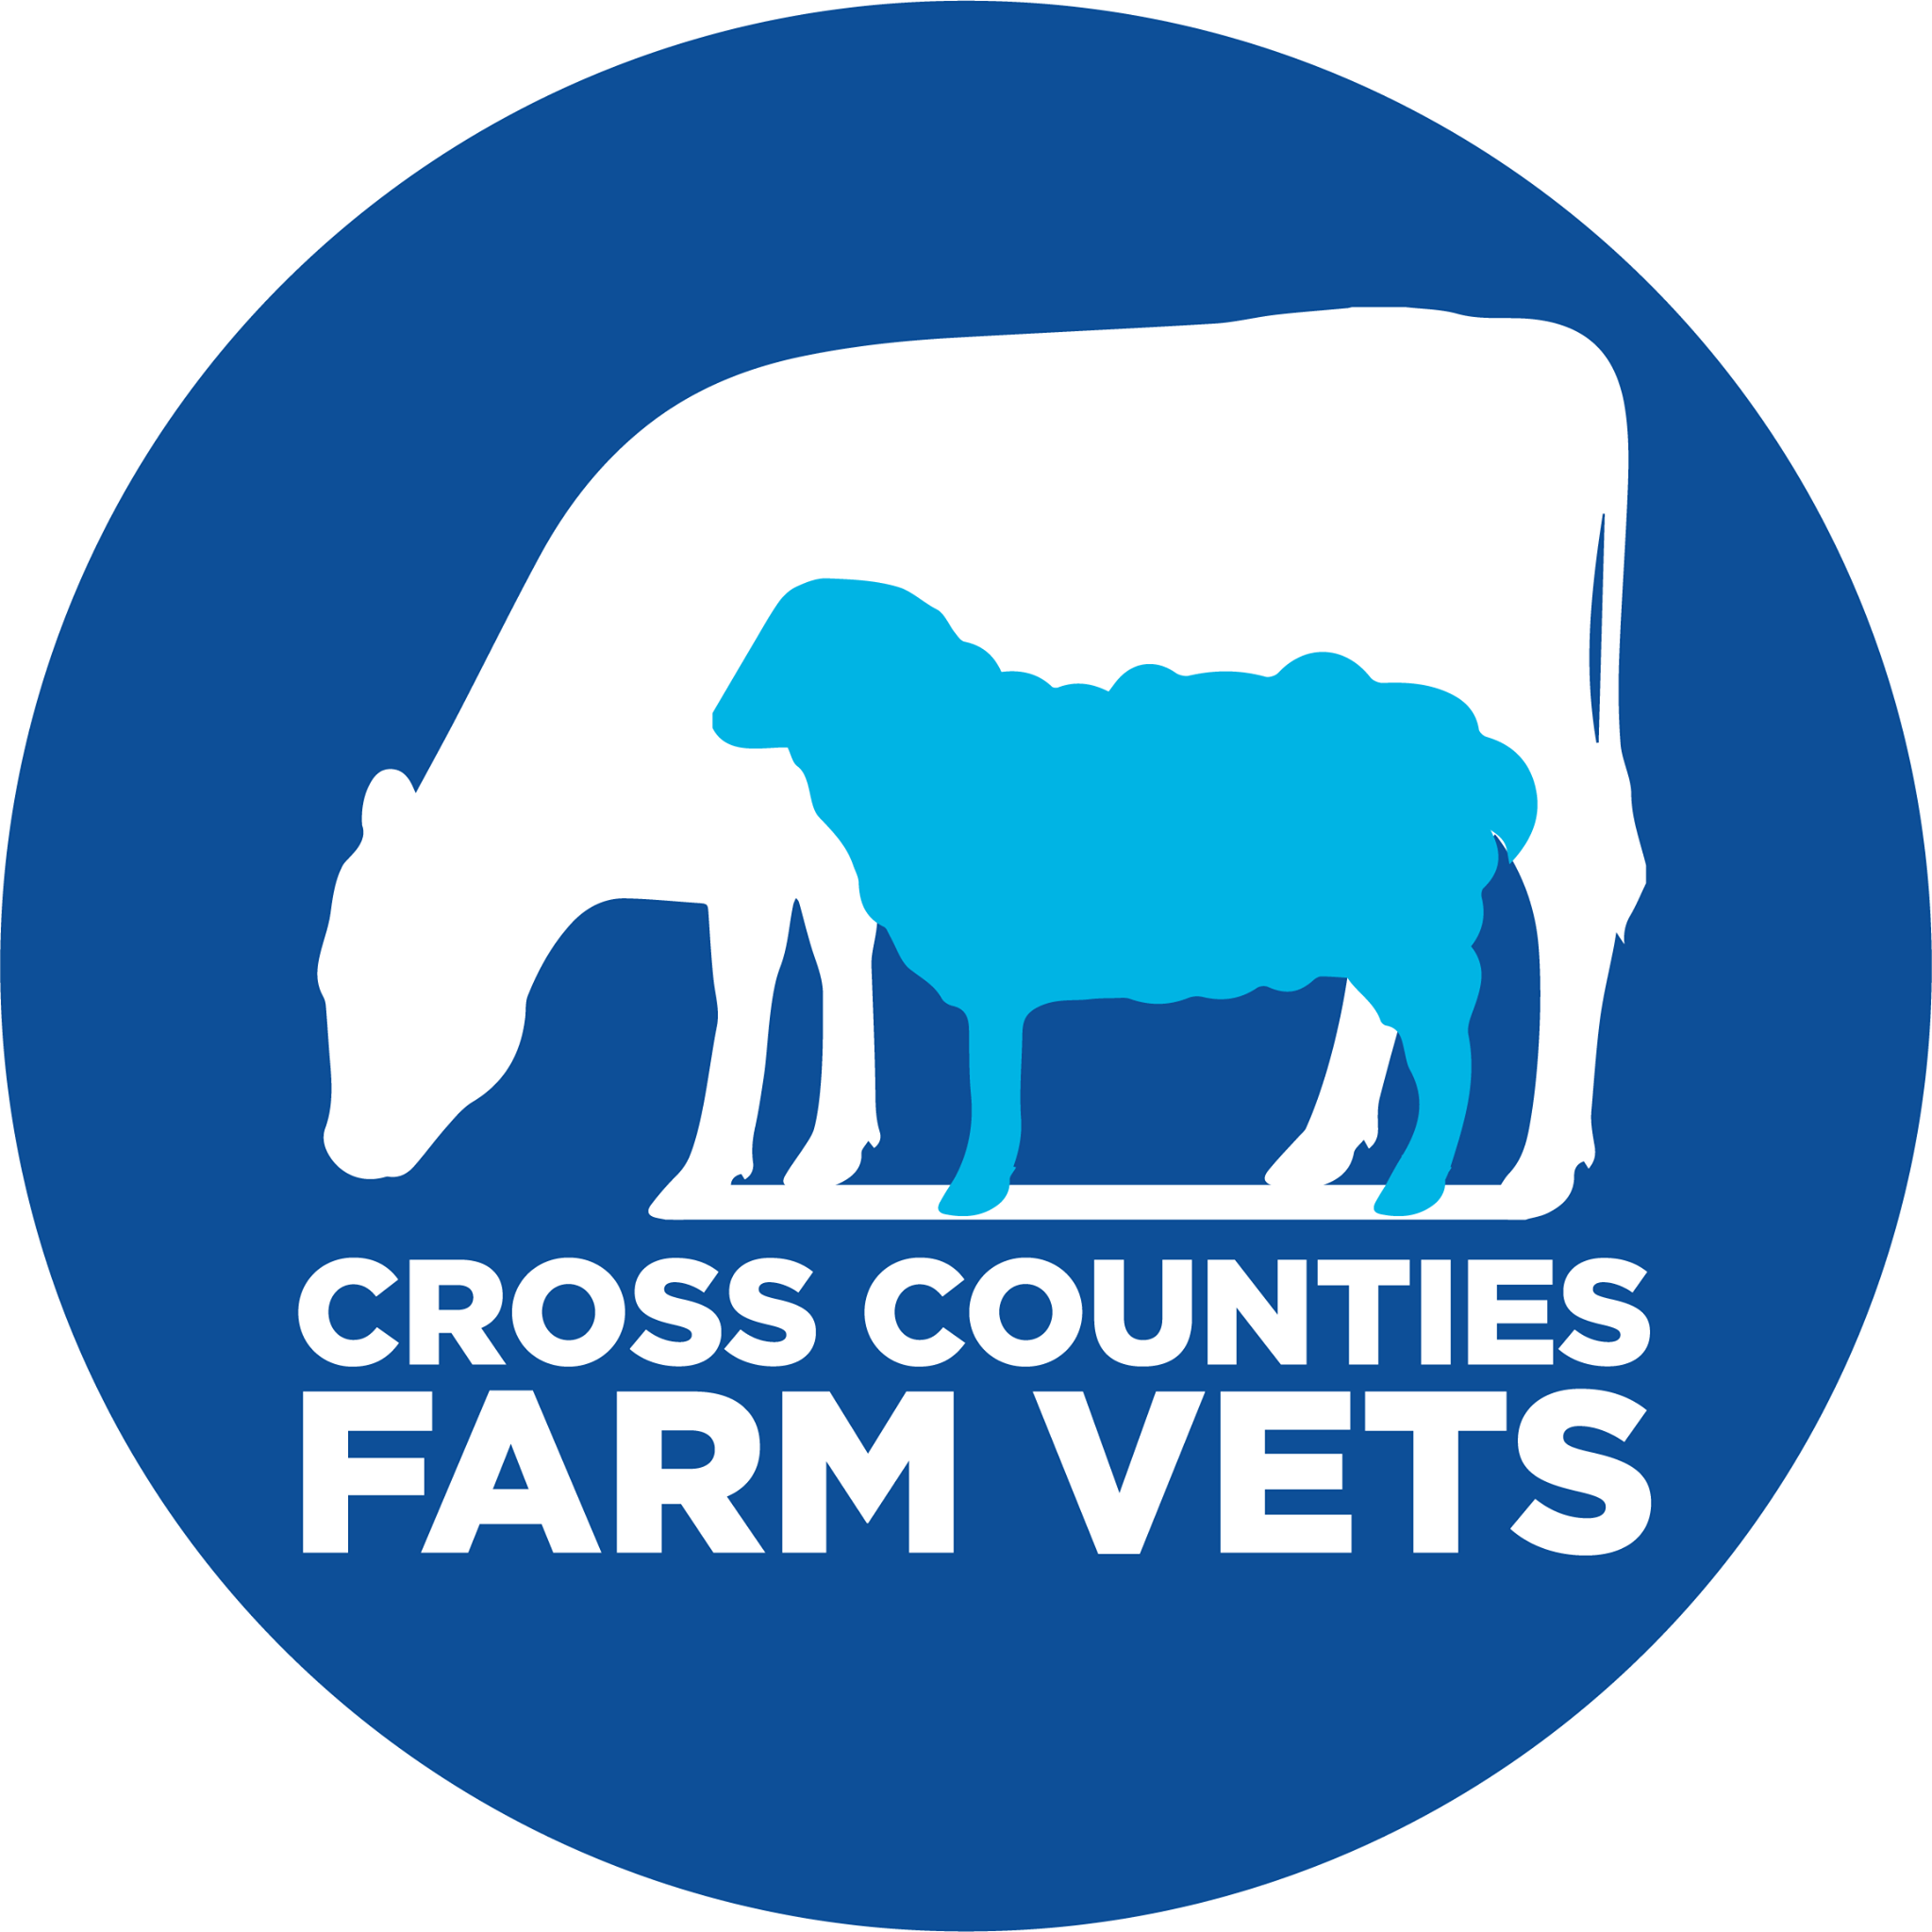 Cross Counties Farm Vets - Lutterworth - Lutterworth, Leicestershire LE17 4NJ - 01455 710935 | ShowMeLocal.com